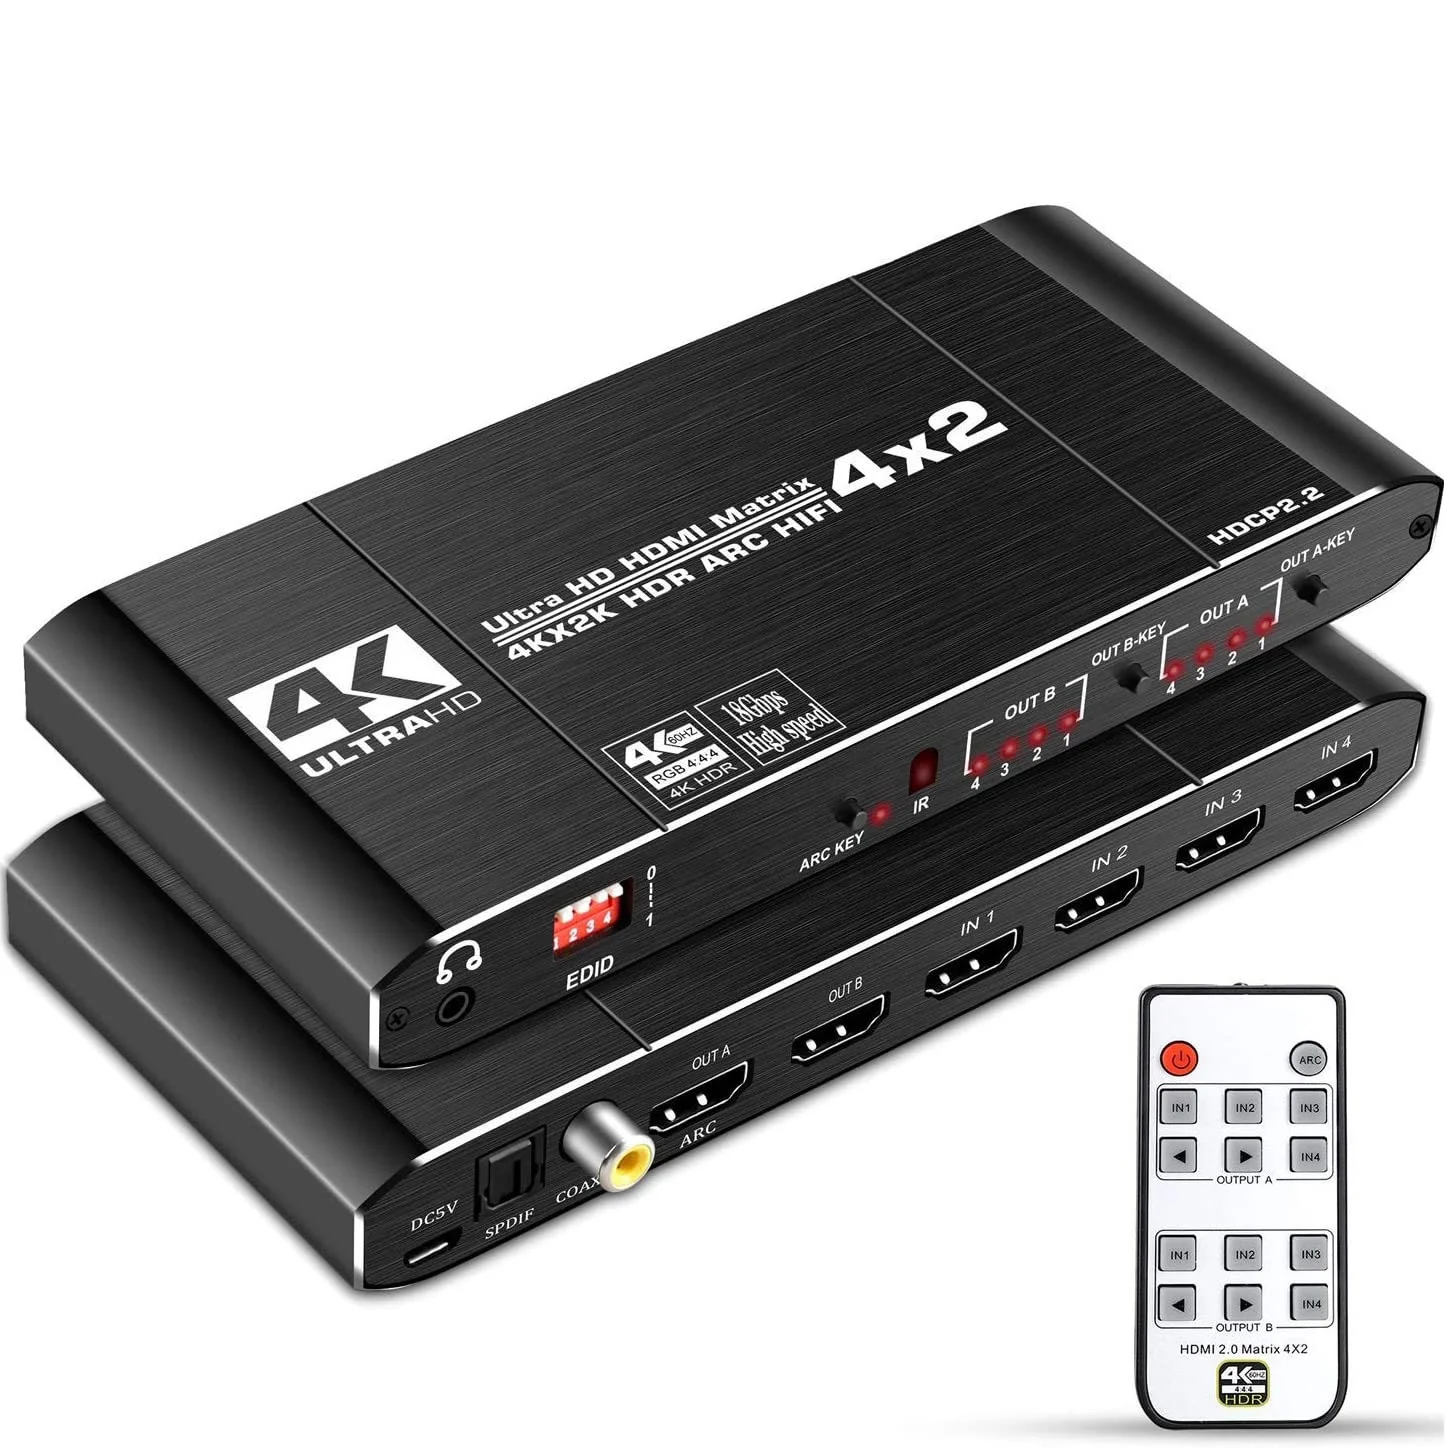 

OZJ2 18Gbps 4x2 HDMI 2.0 Matrix Switch Splitter 4K@60Hz 4:4:4 Switcher 4 in 2 Out with IR Remote Controller Support ARC HDCP 2.2, Black